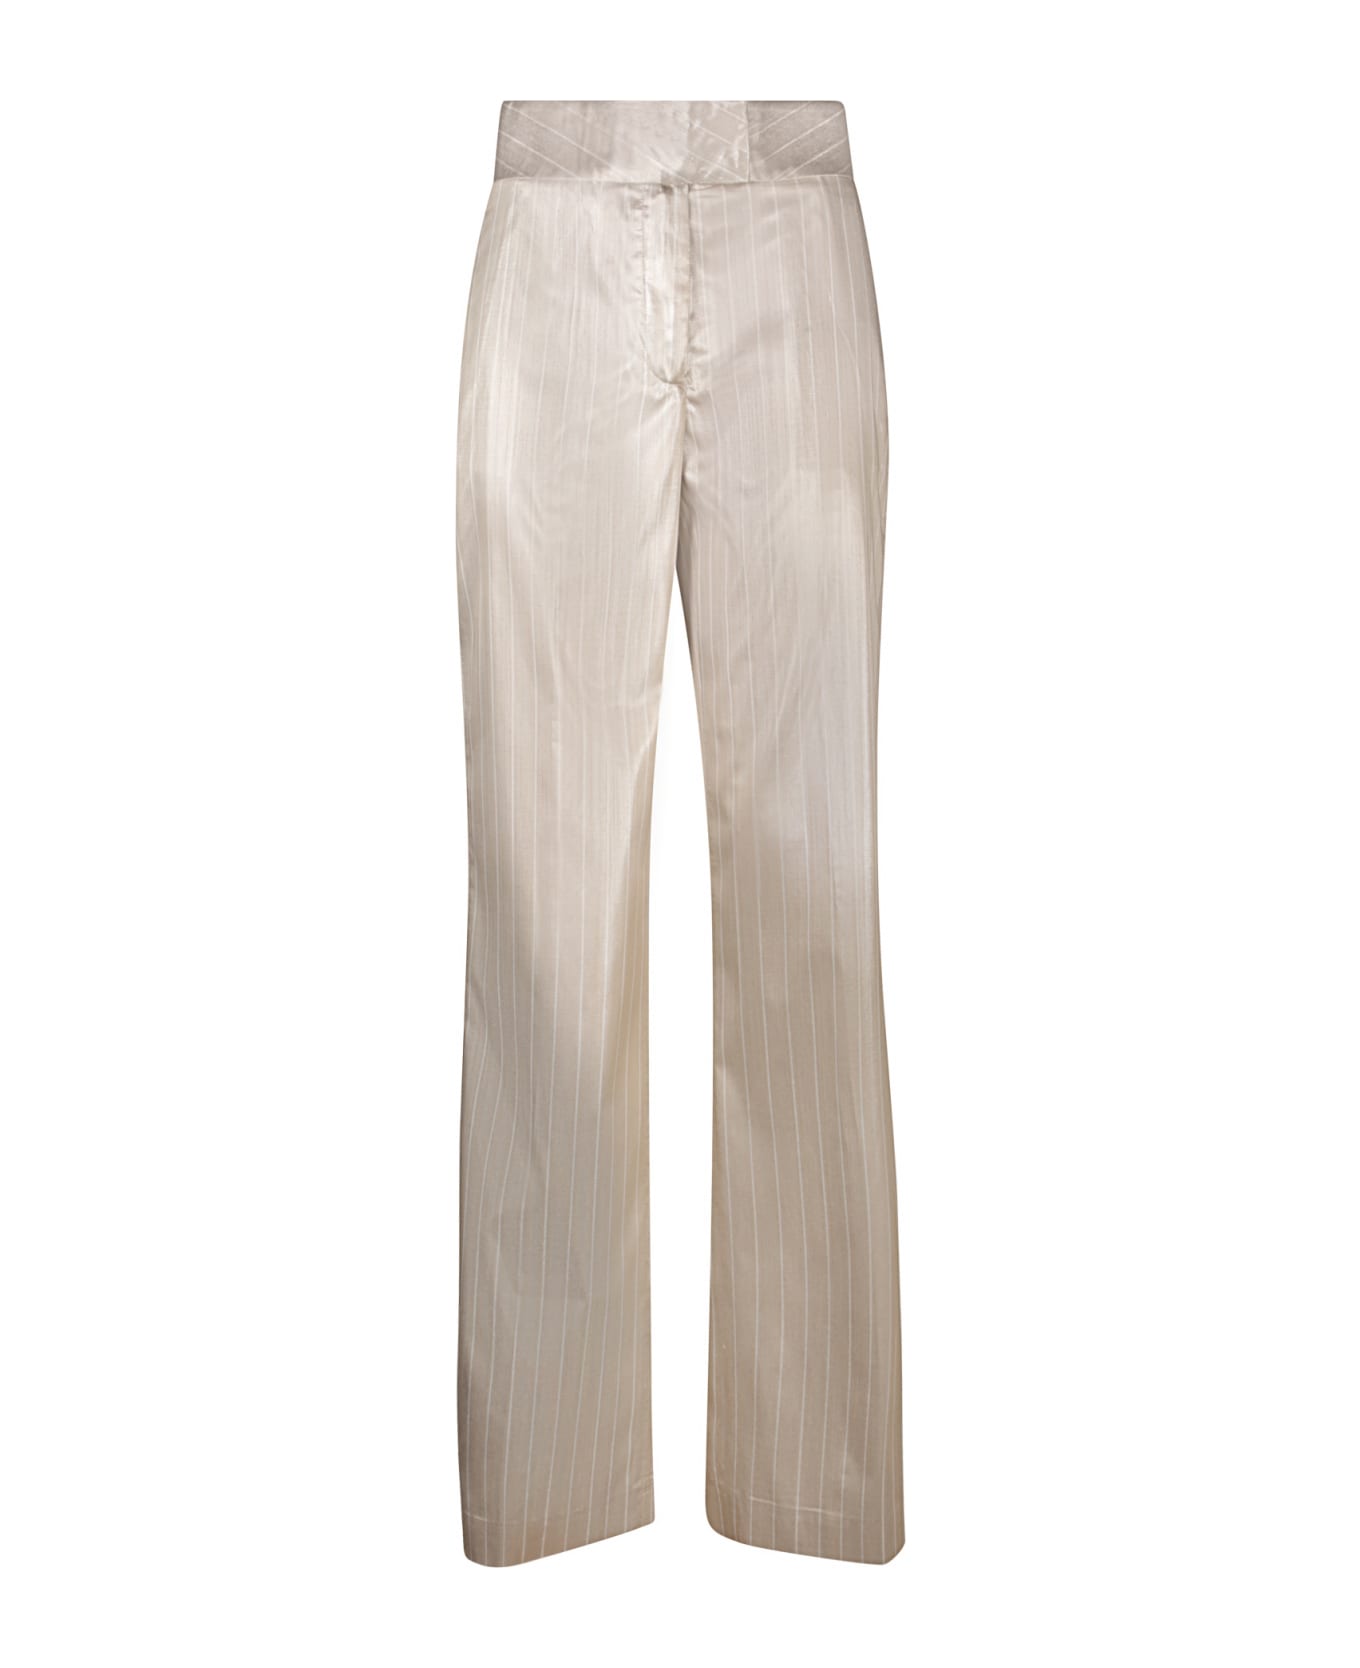 Genny Satin Striped Sand Trousers - Beige ボトムス